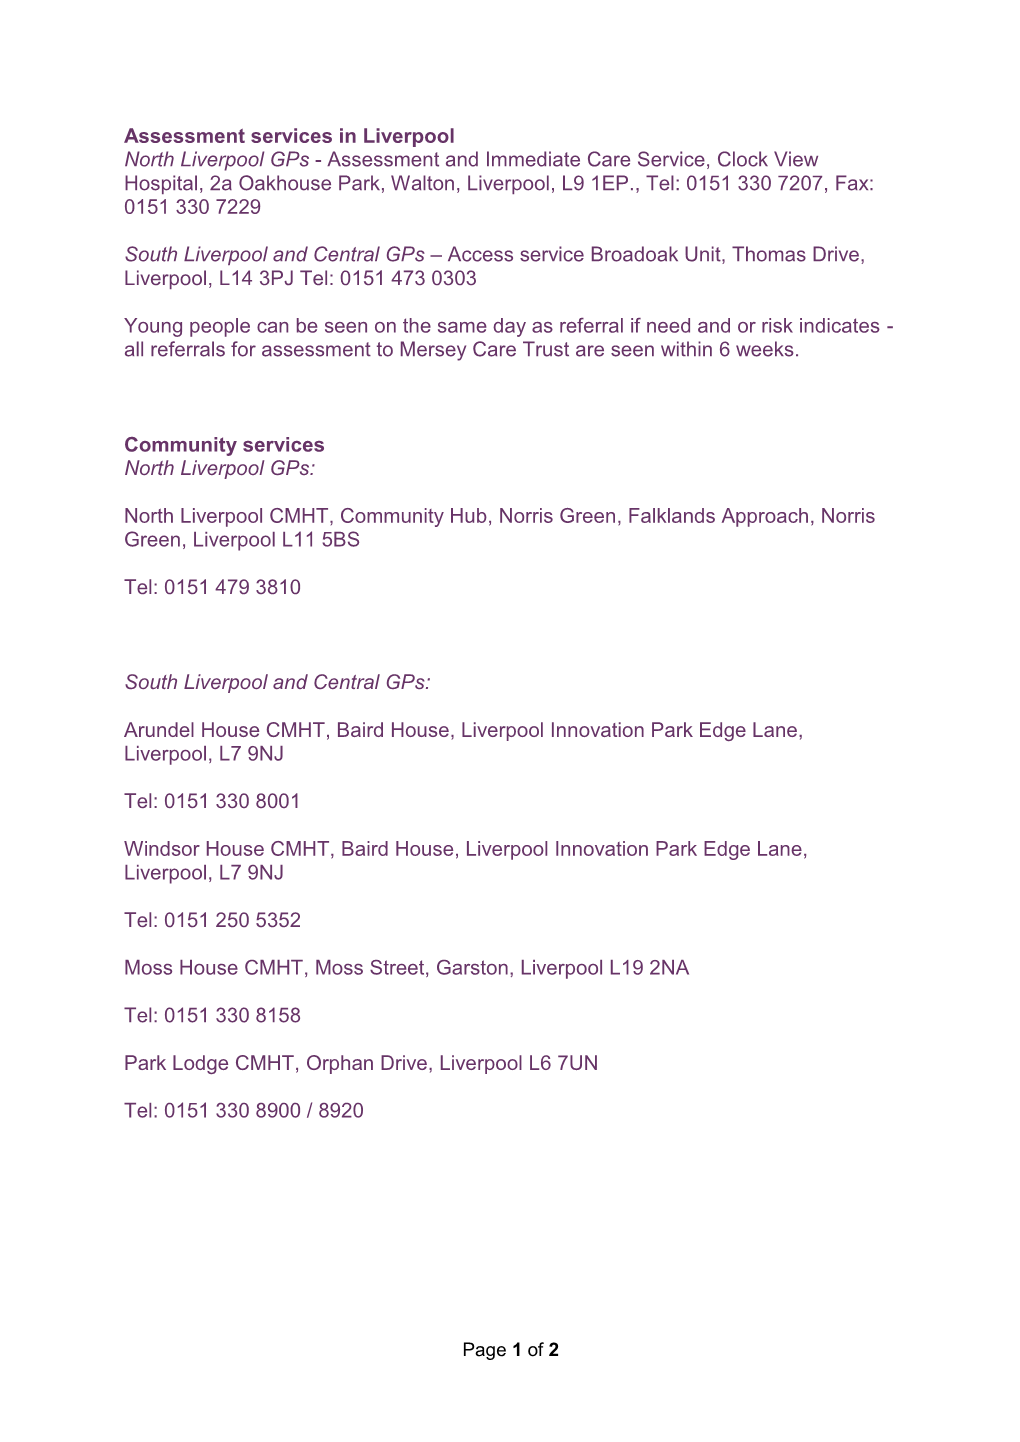 Mersey-Care-Contact-Information.Pdf